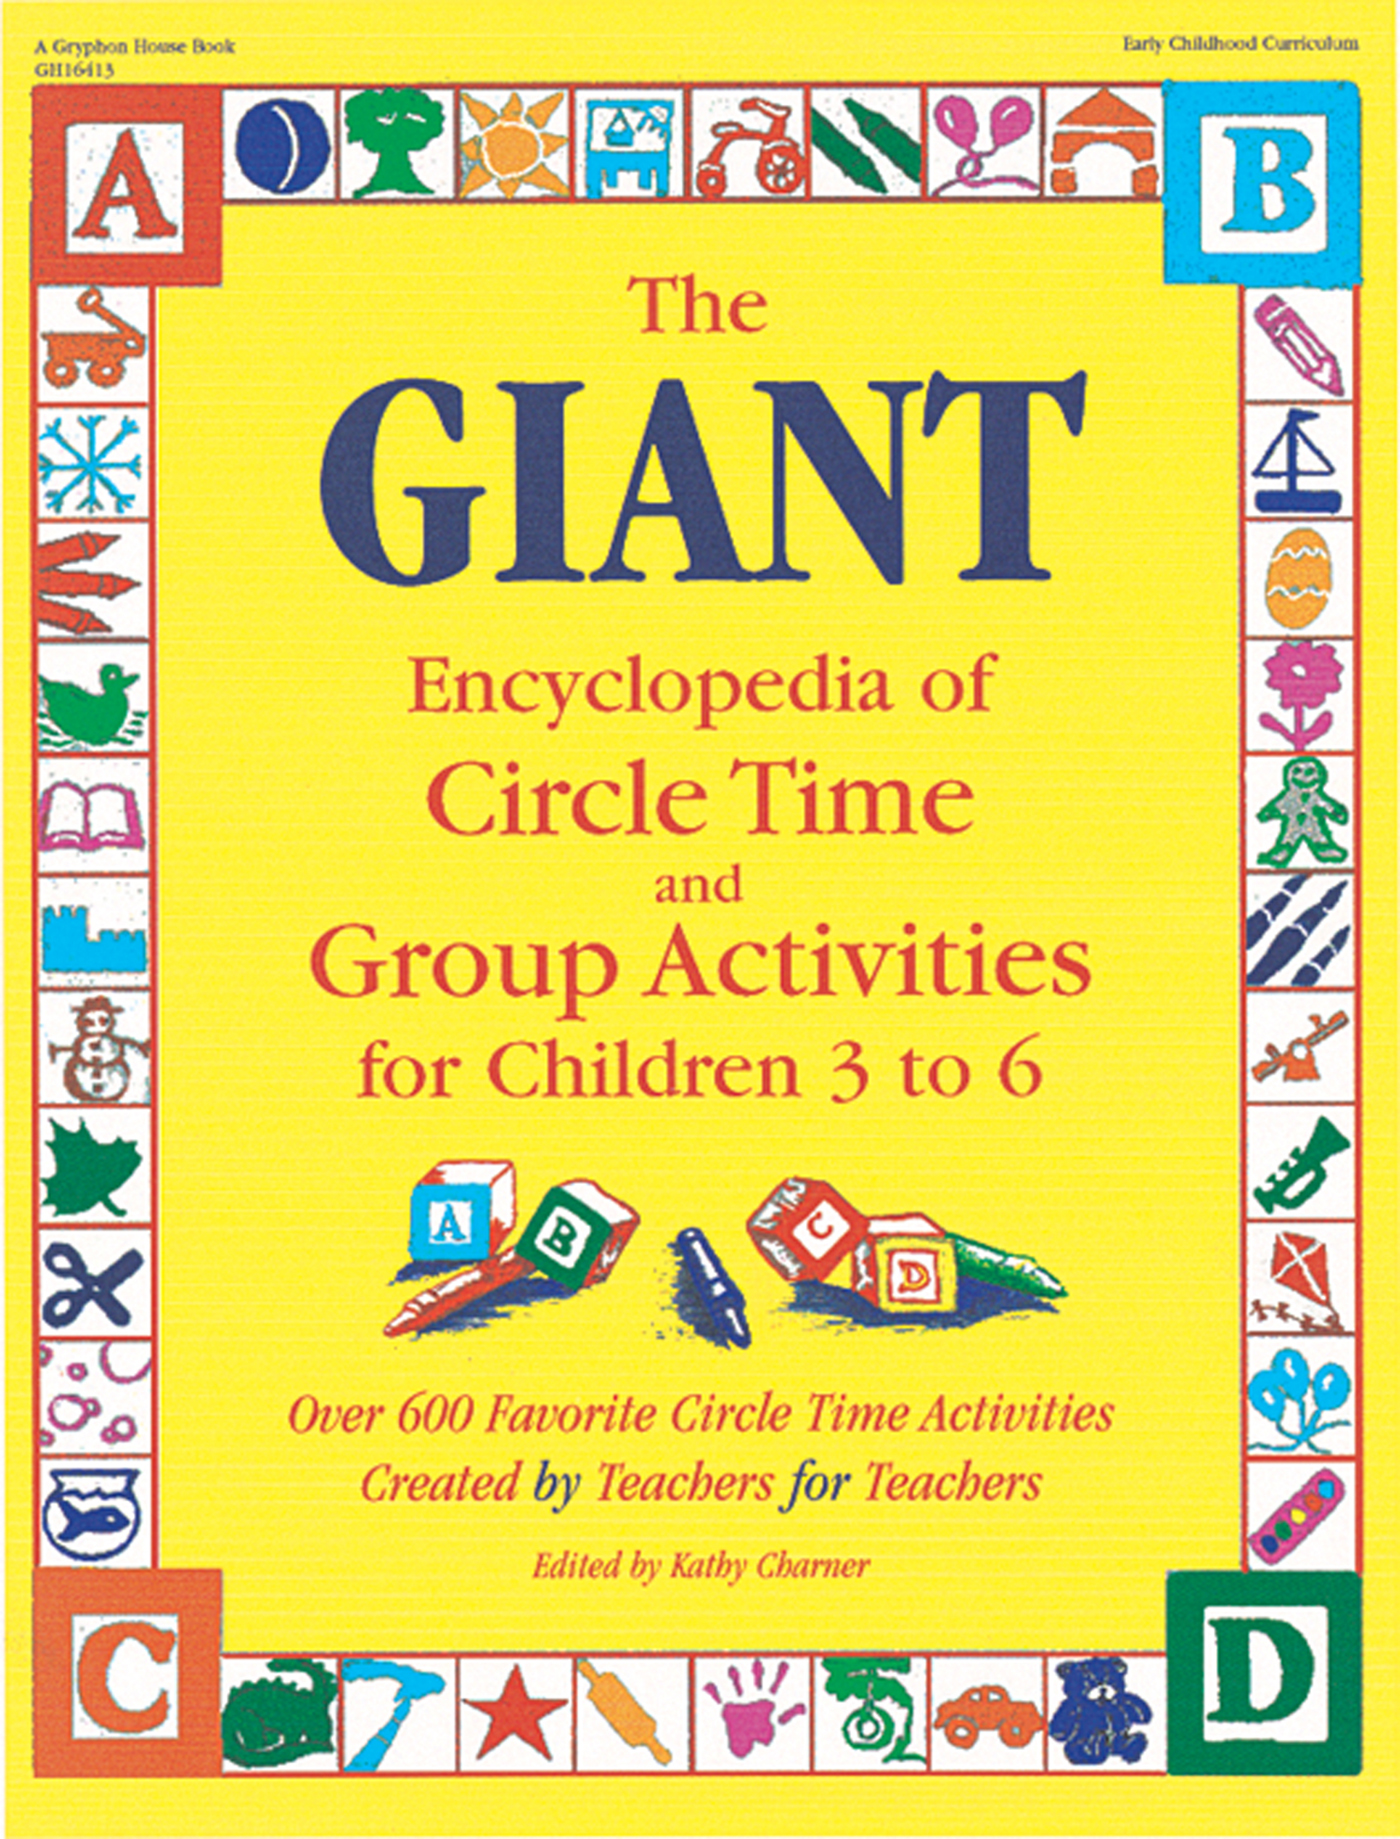 The GIANT Encyclopedia of Circle Time and Group Activities for Children 3 to 6